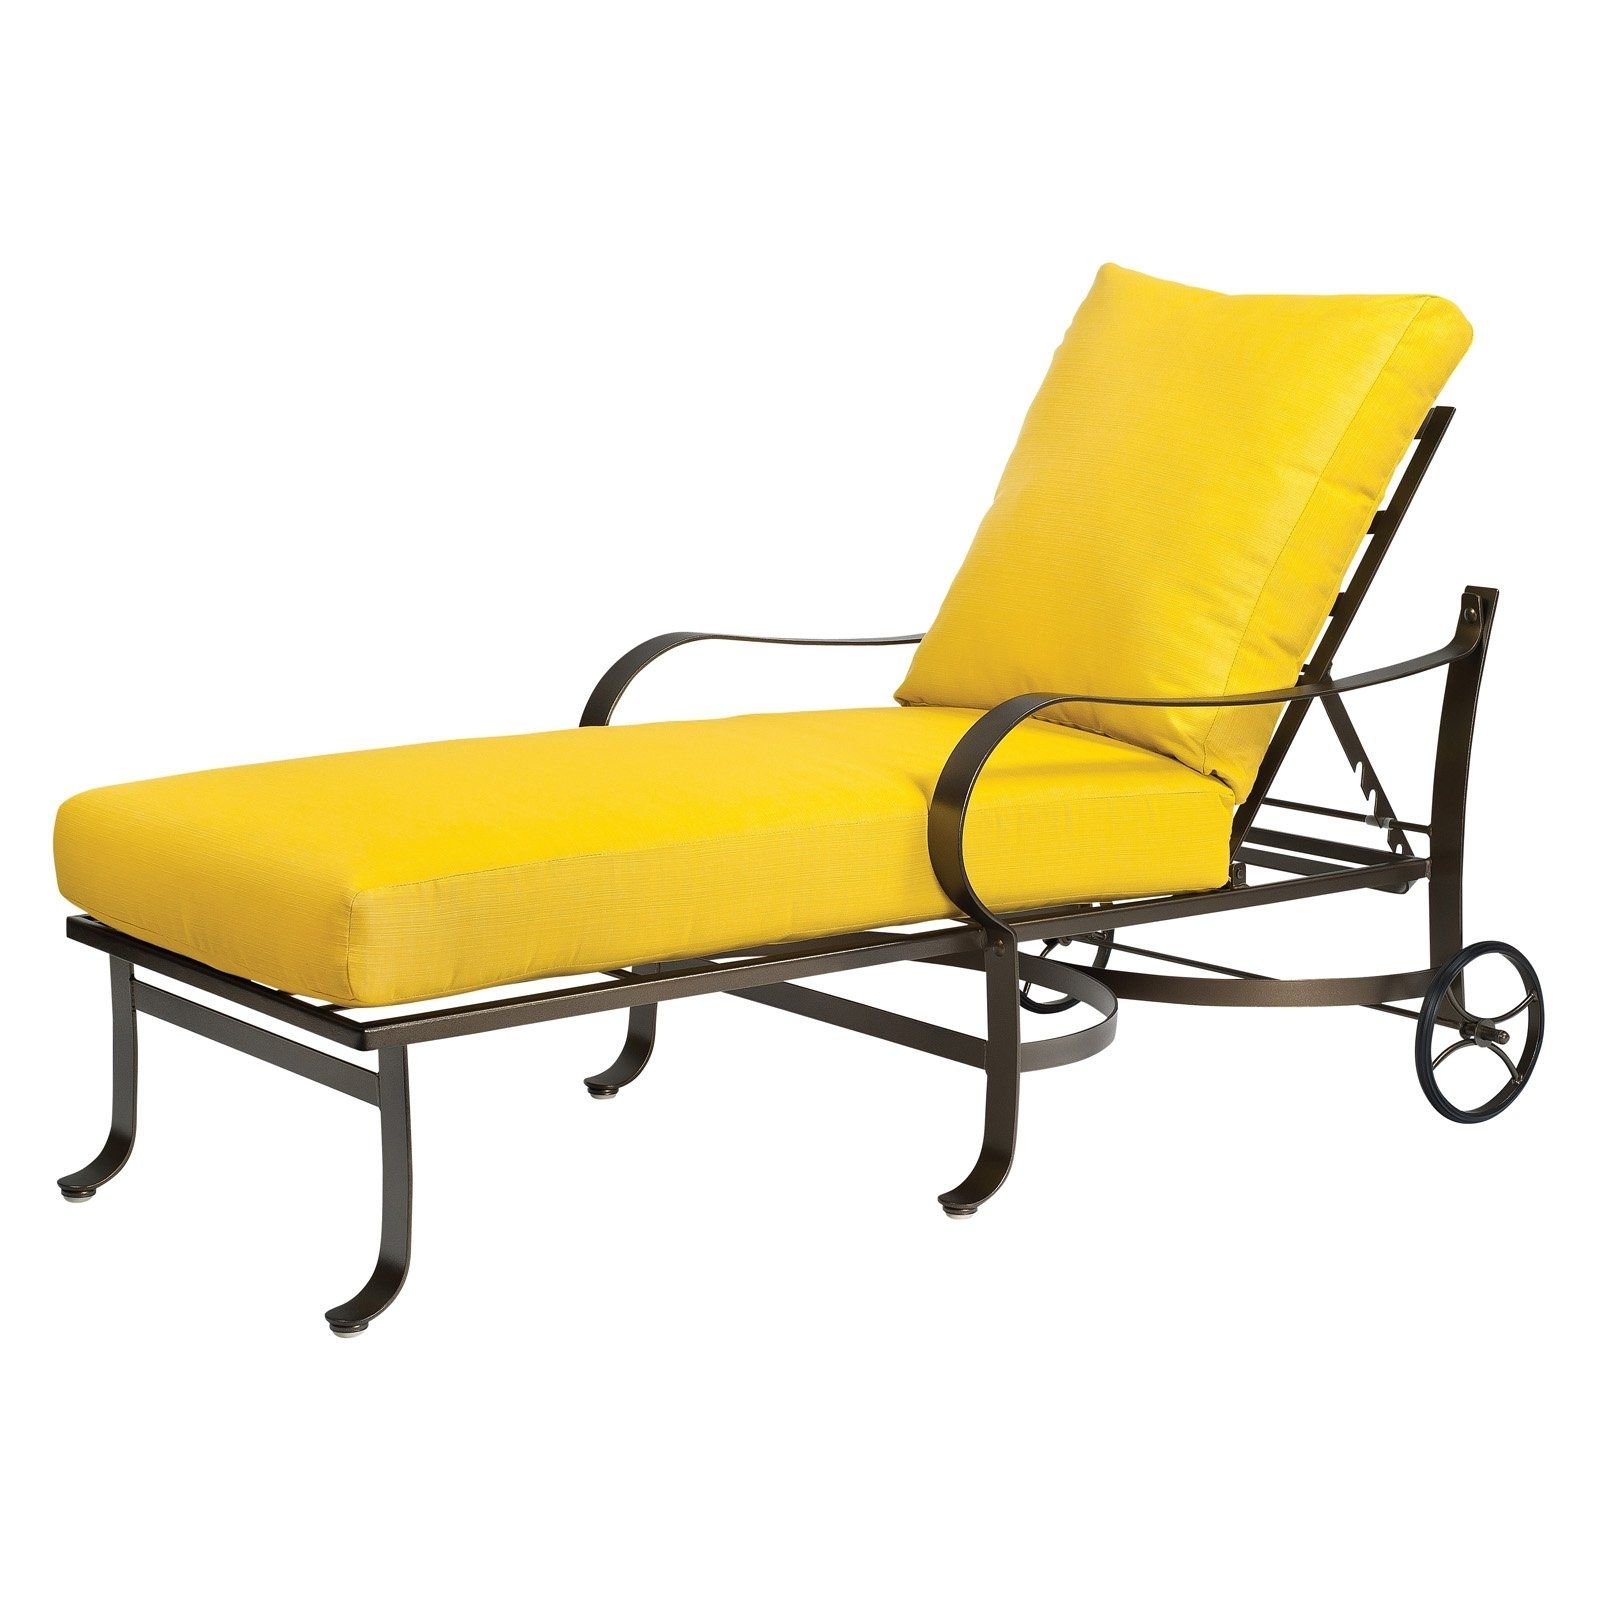 Yellow Lounge Chair Cushions • Lounge Chairs Ideas For Well Known Yellow Chaise Lounge Chairs (View 10 of 15)